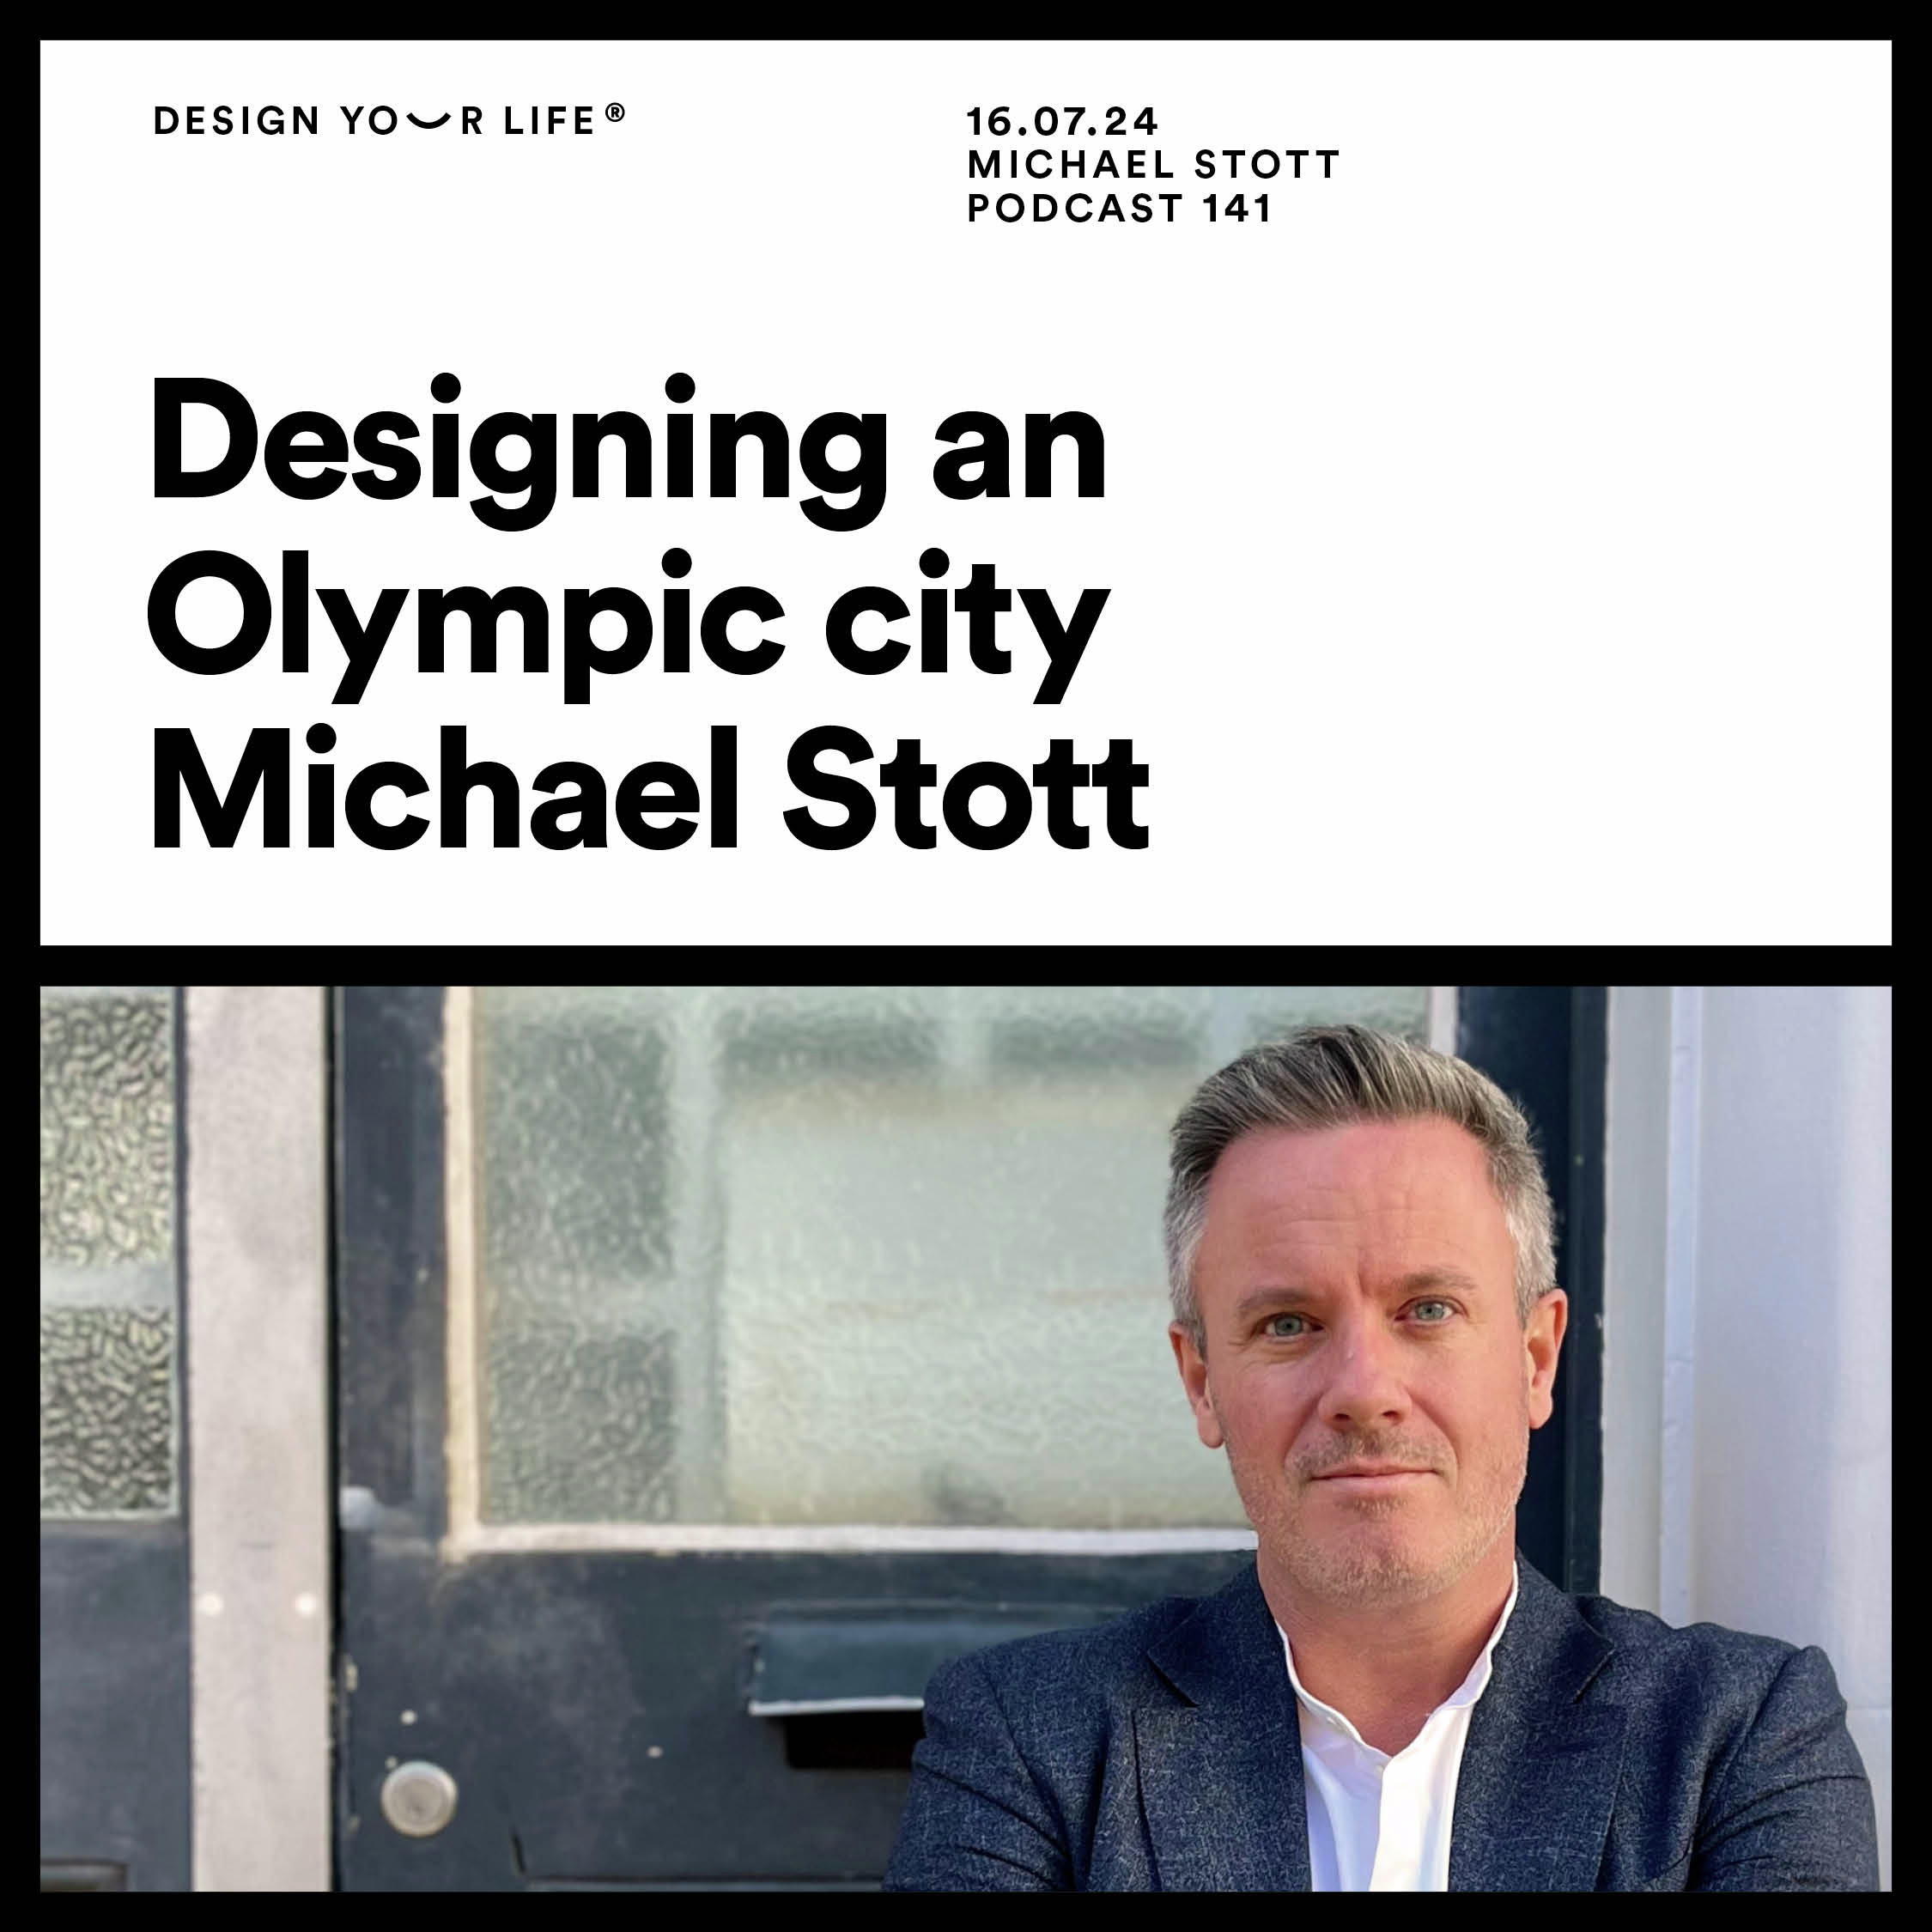 Designing an Olympic city with Michael Stott